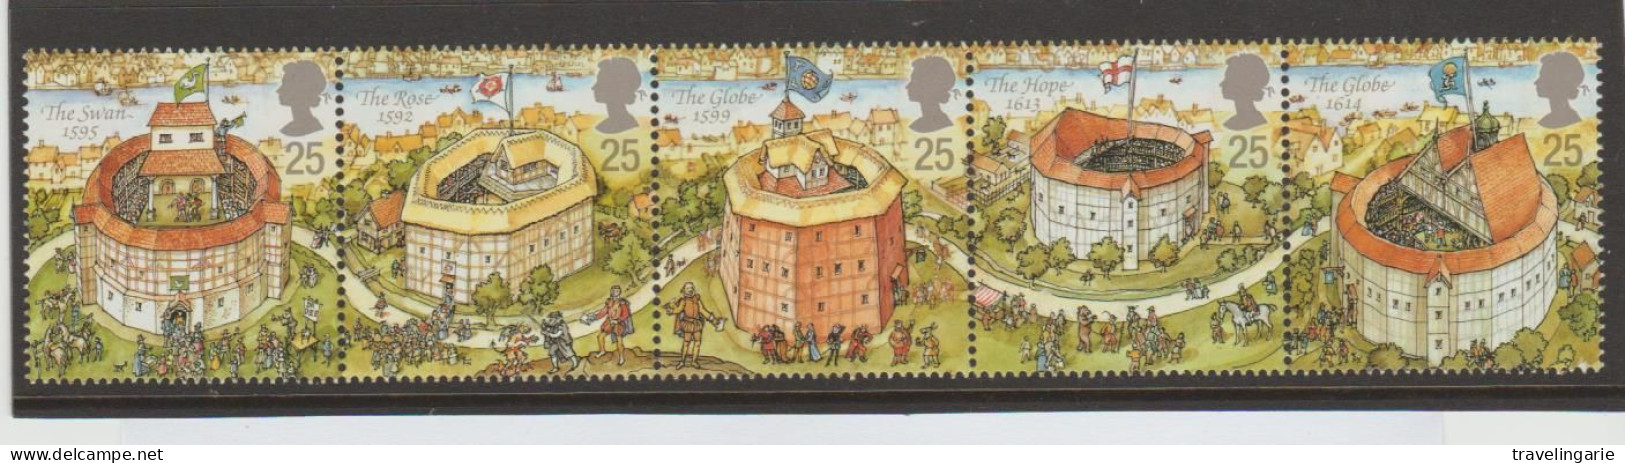 Great Britain 1995 Opening Shakespeare's Globe Theater MNH ** - Théâtre